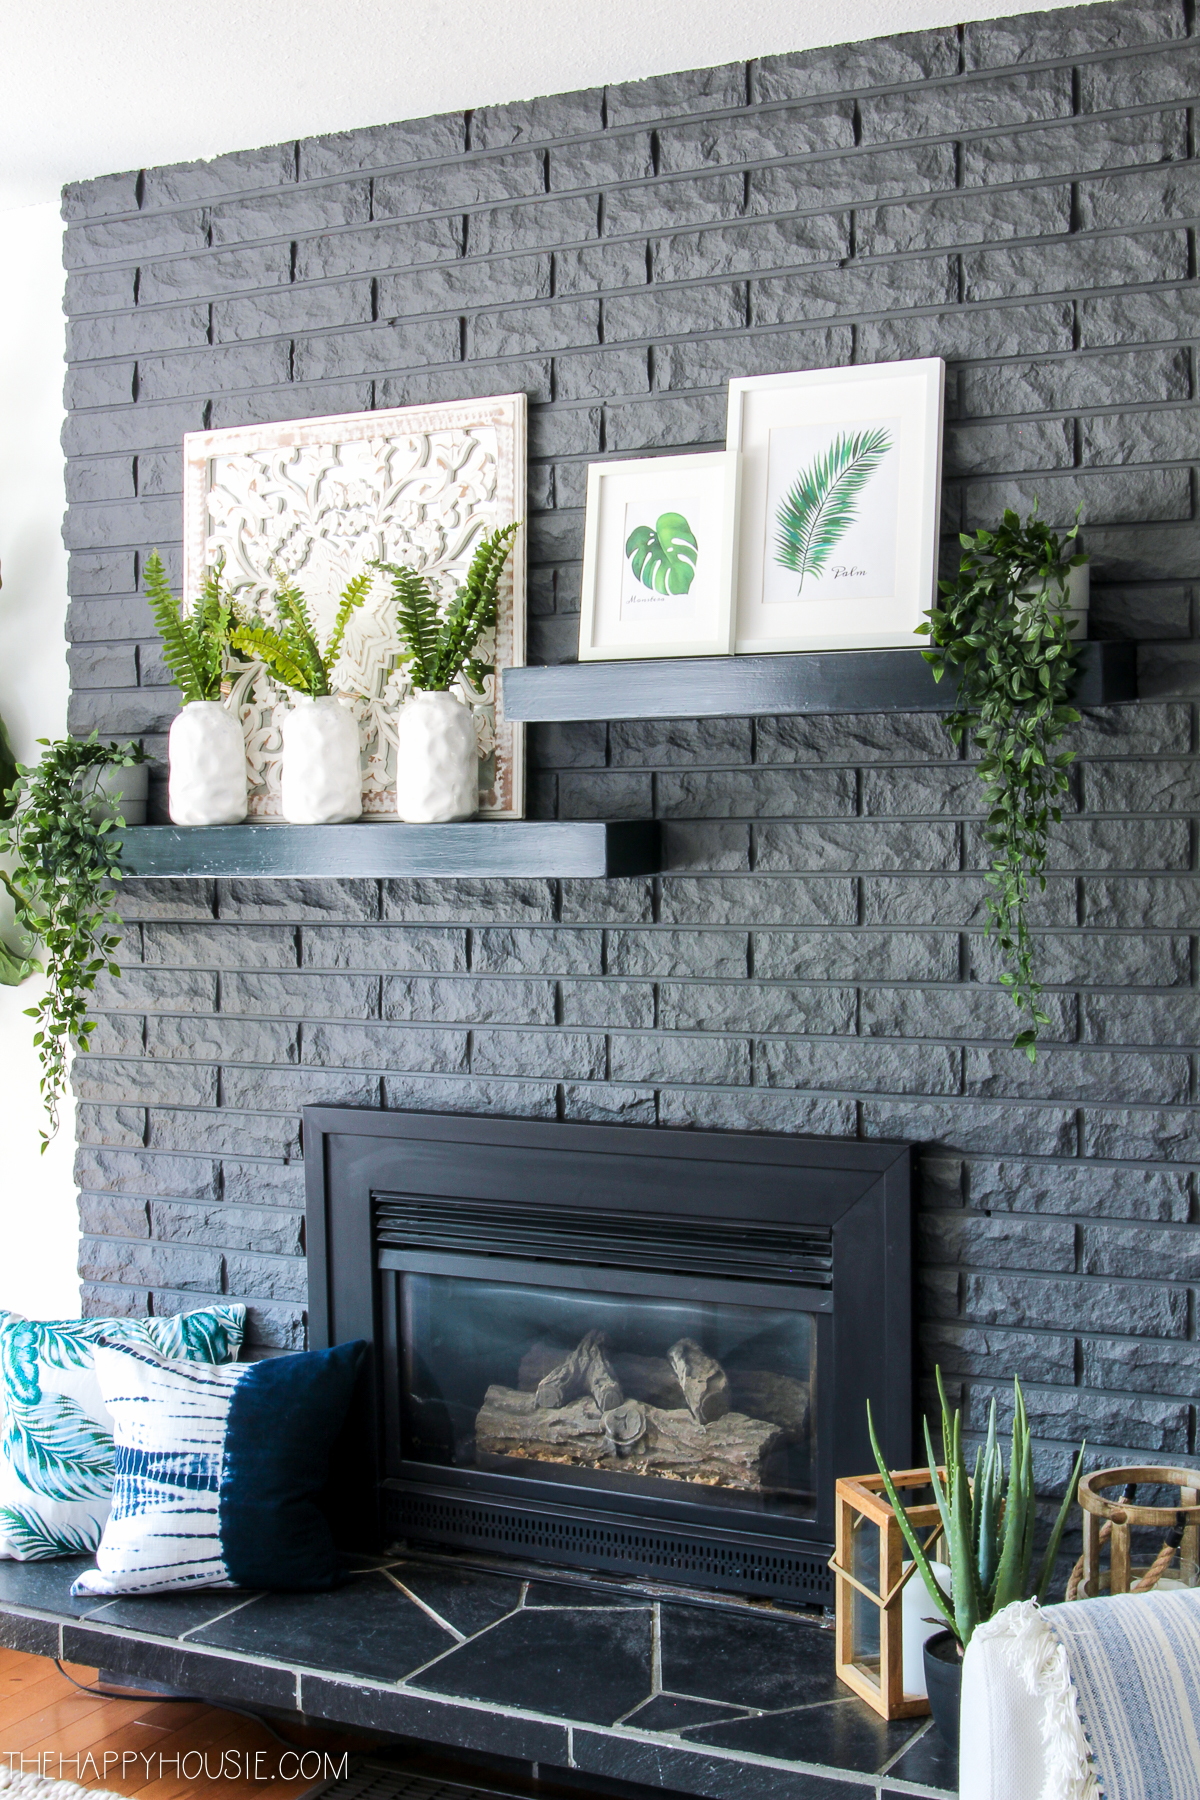 The fireplace mantel is a dark grey and has small shelves with framed prints on it.